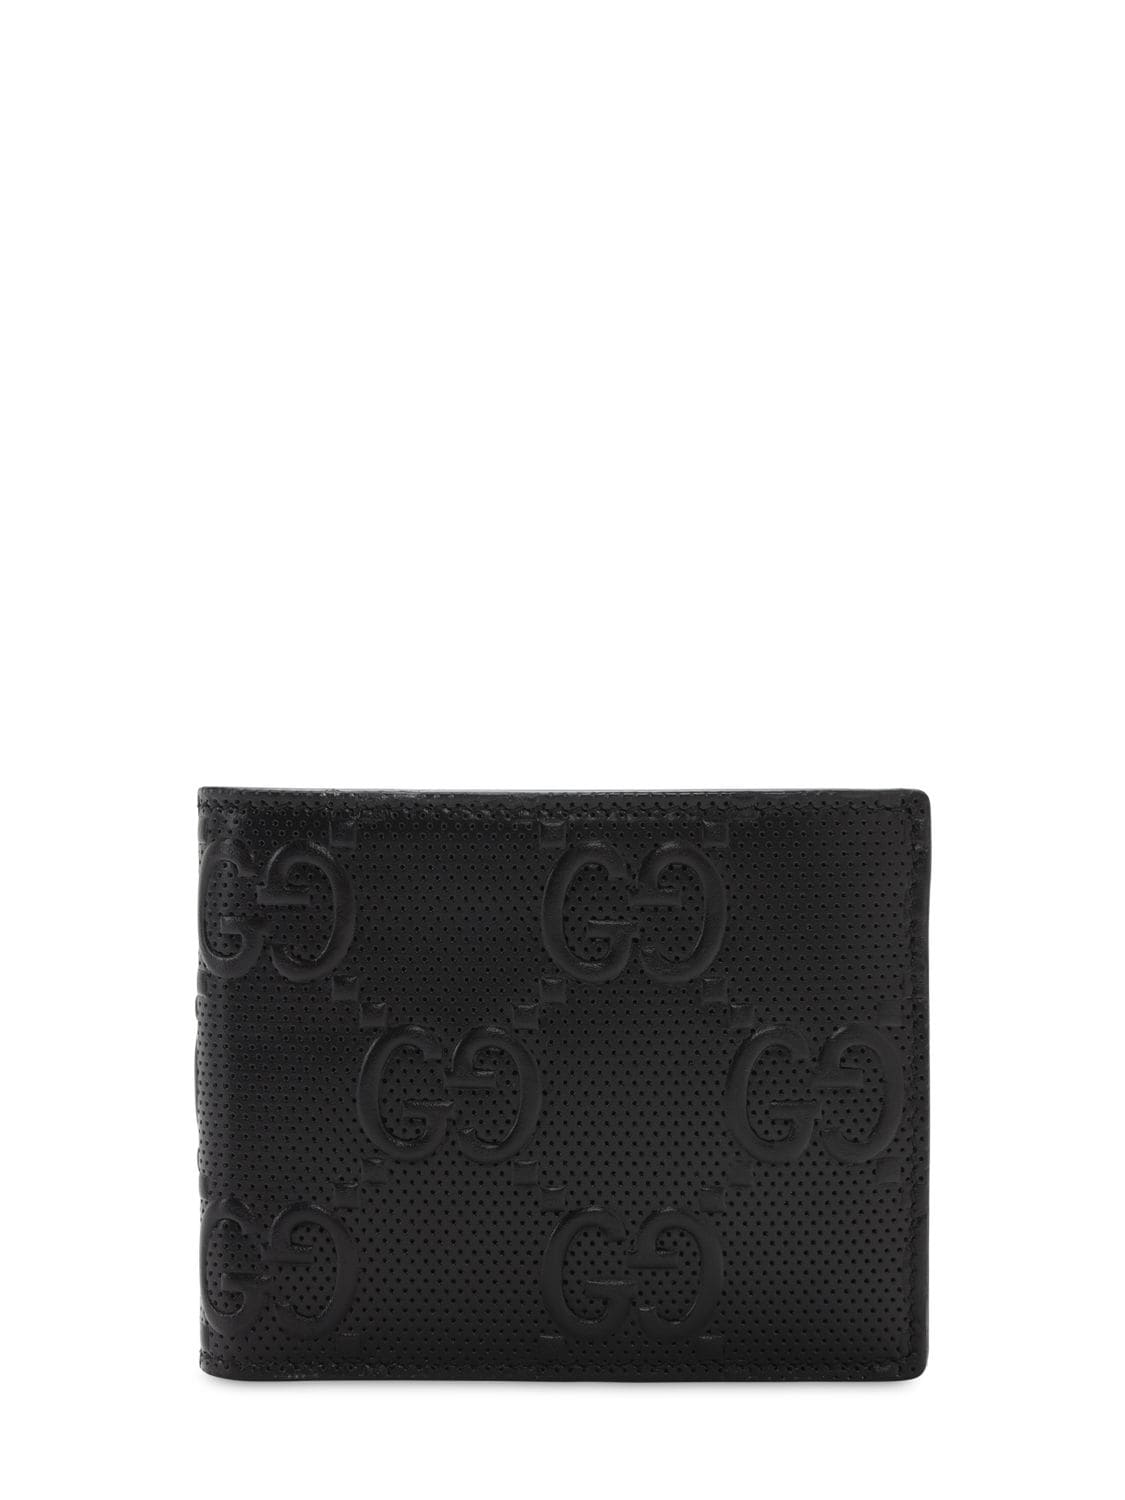 Gg Embossed Leather Wallet